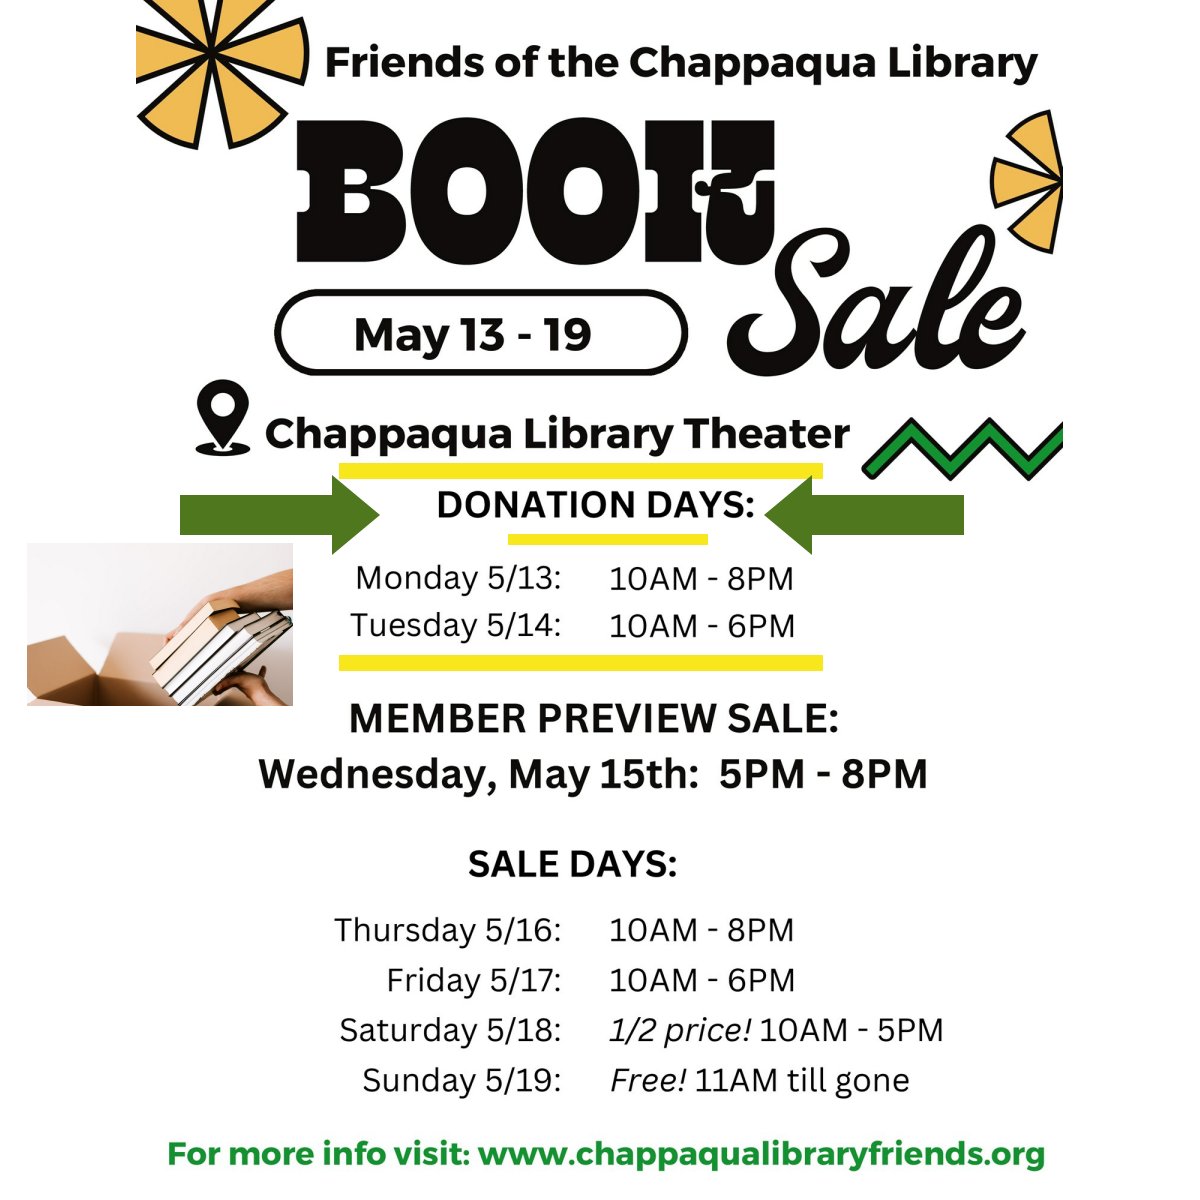 Book Donation Days are coming! Bring your books to the Theater entrance on Monday 5/13, and Tuesday 5/14.